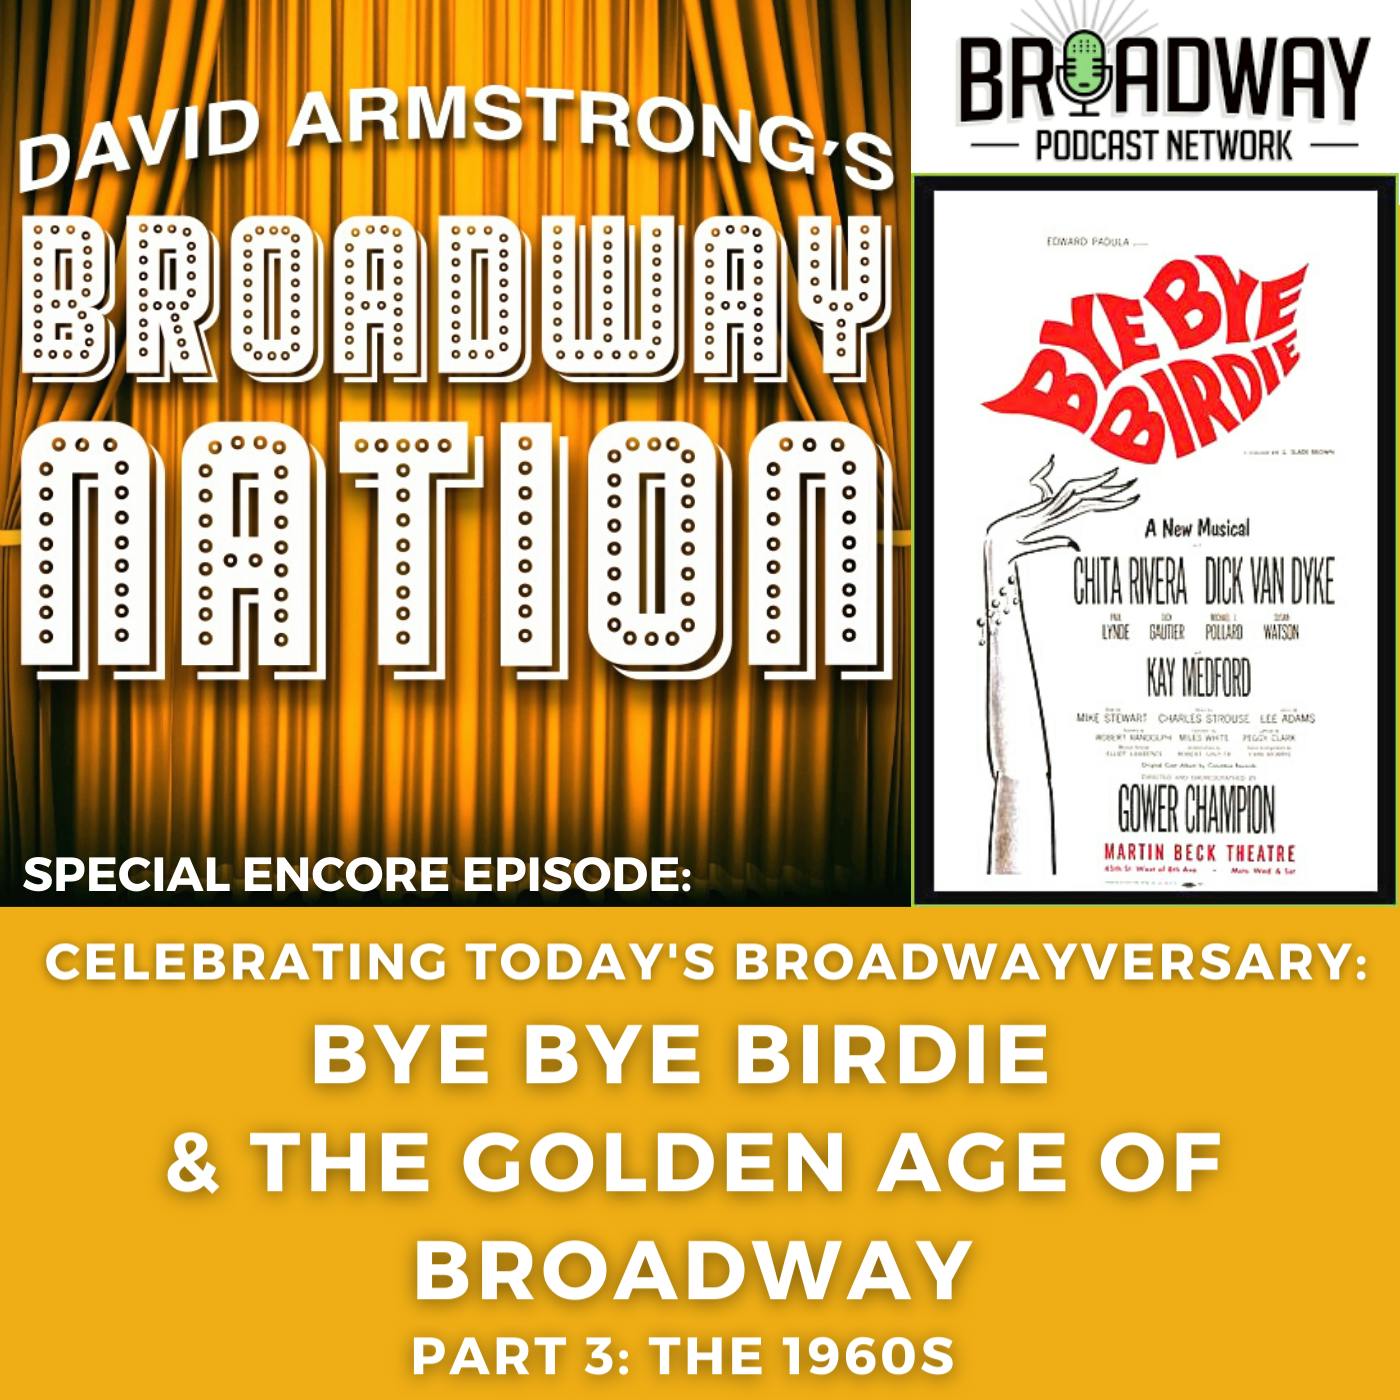 Special Encore Episode:  Bye Bye Birdie & The Golden Age of Broadway, Part 3: The 1960s Image